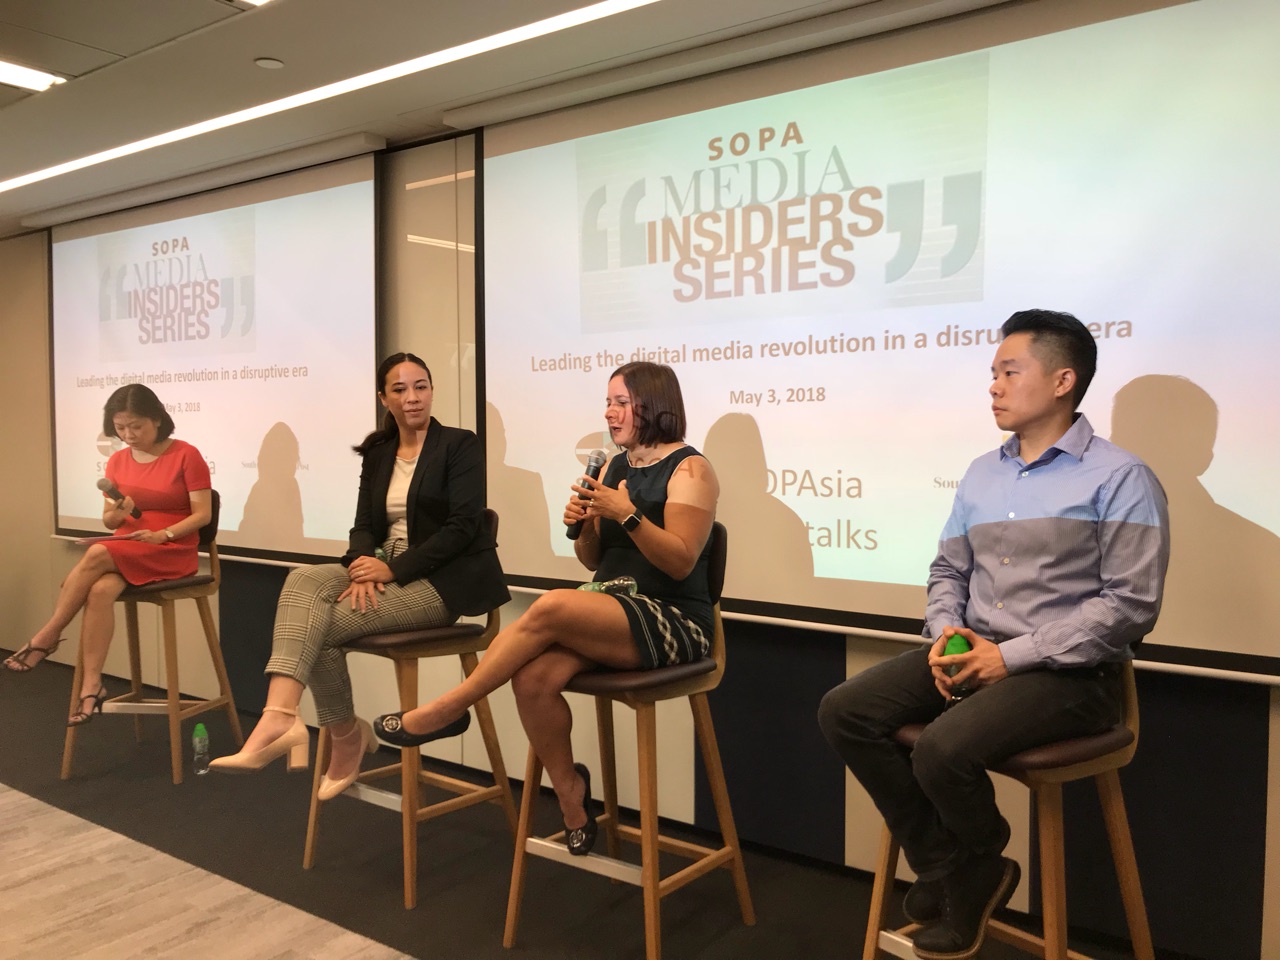 (From left to right) Inkstone’s senior editor Juliana Liu moderating a panel on digital media with Coconuts’ Tara Chanapai, Bloomberg’s Anjali Kapoor, and SCMP’s Malcolm Ong. Photo by Chad Williams.